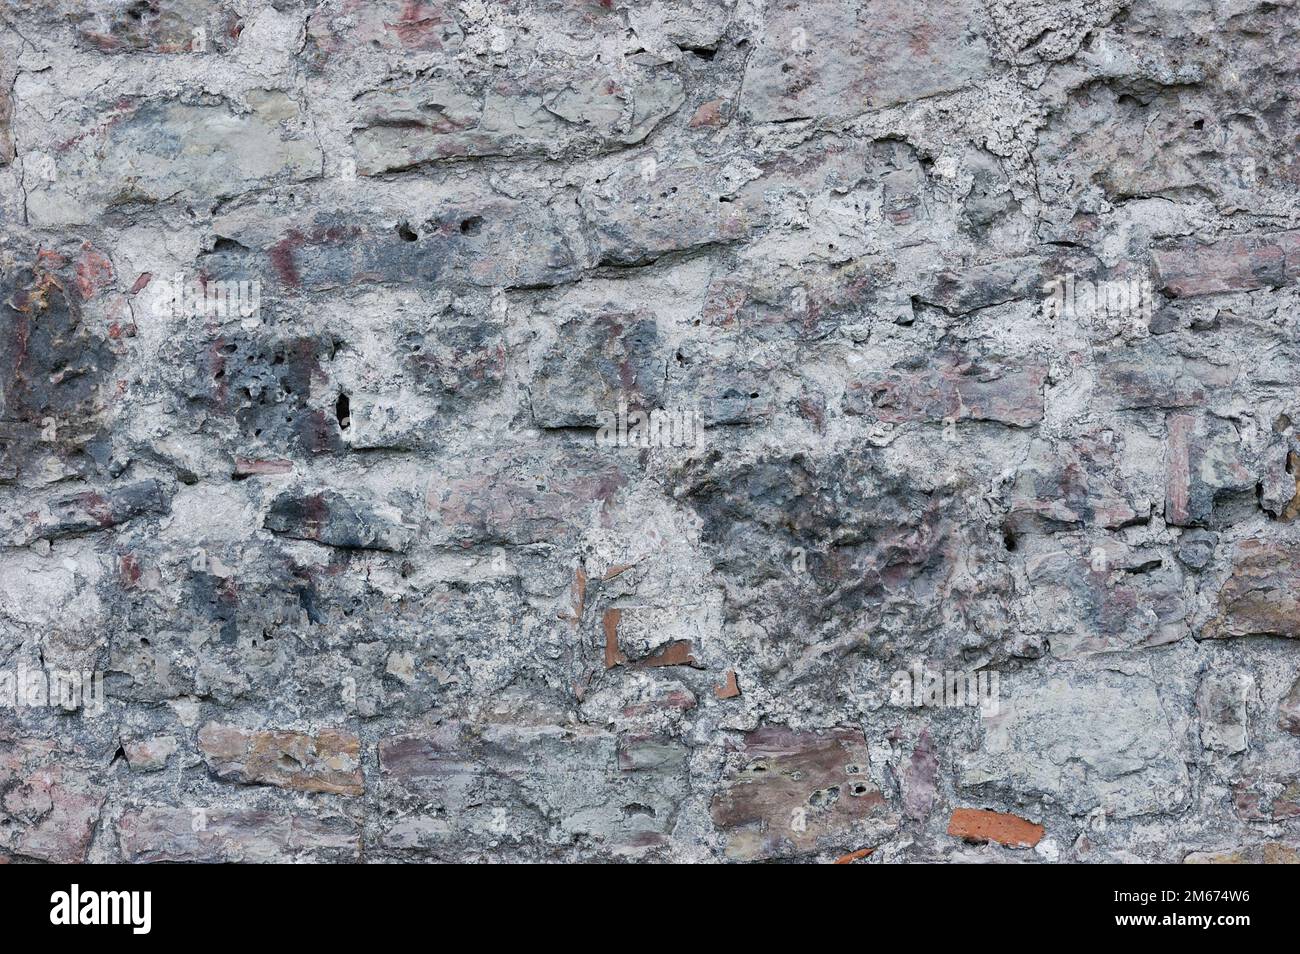 Stone wall background closeup, horizontal plastered grunge red grey beige stonewall limestone pattern, old aged weathered gray lime plaster texture Stock Photo